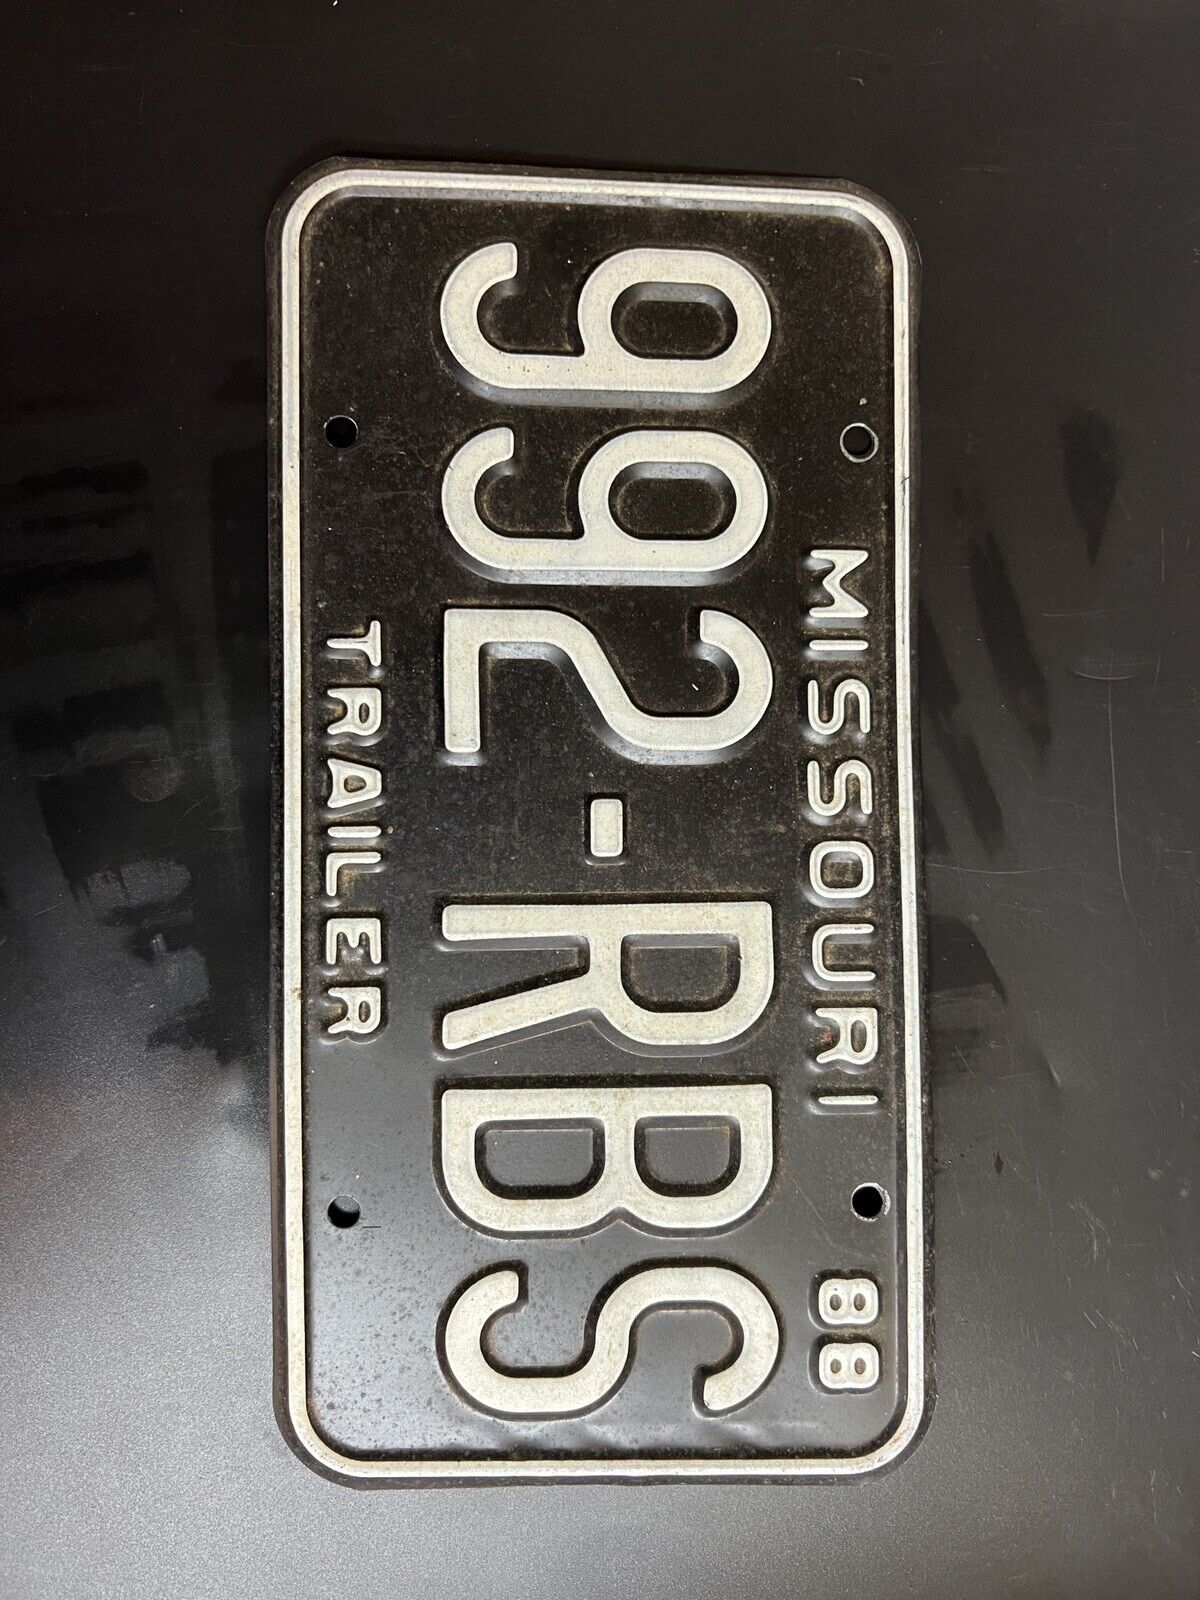 Vintage 1988 Missouri Trailer License Plate Tag Black With White Lettering